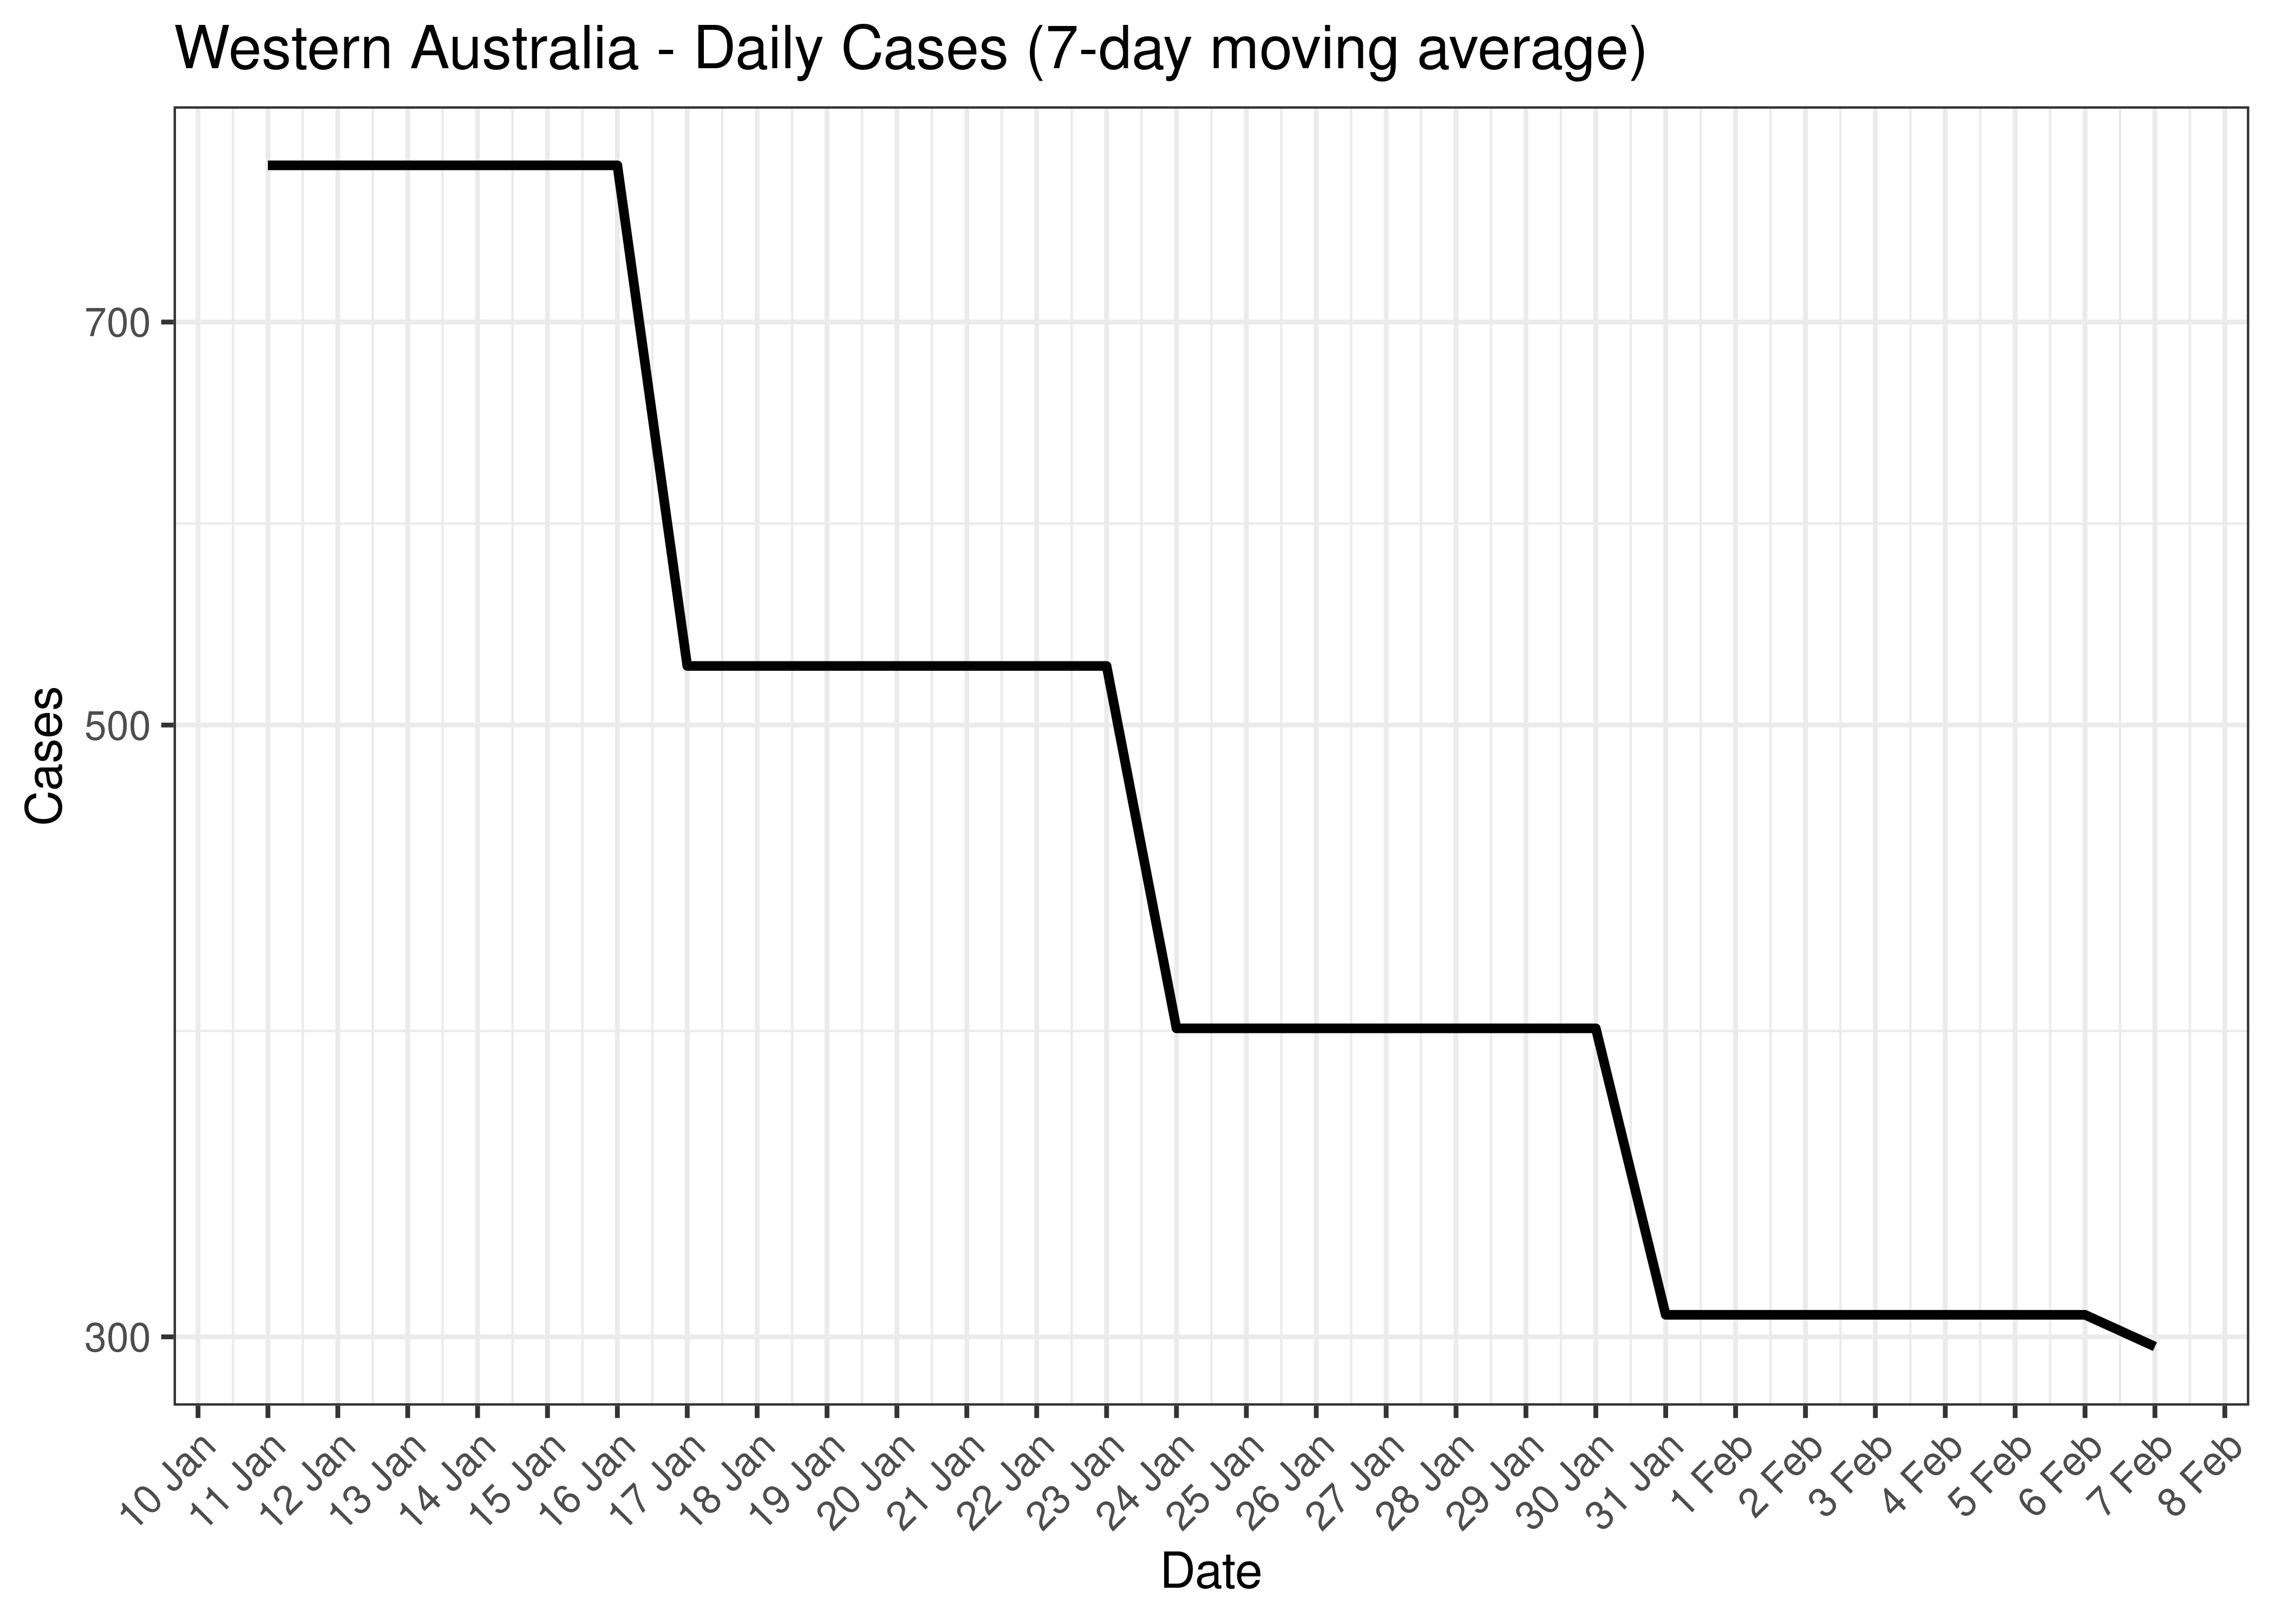 Western Australia - Daily Cases for Last 30-days (7-day moving average)